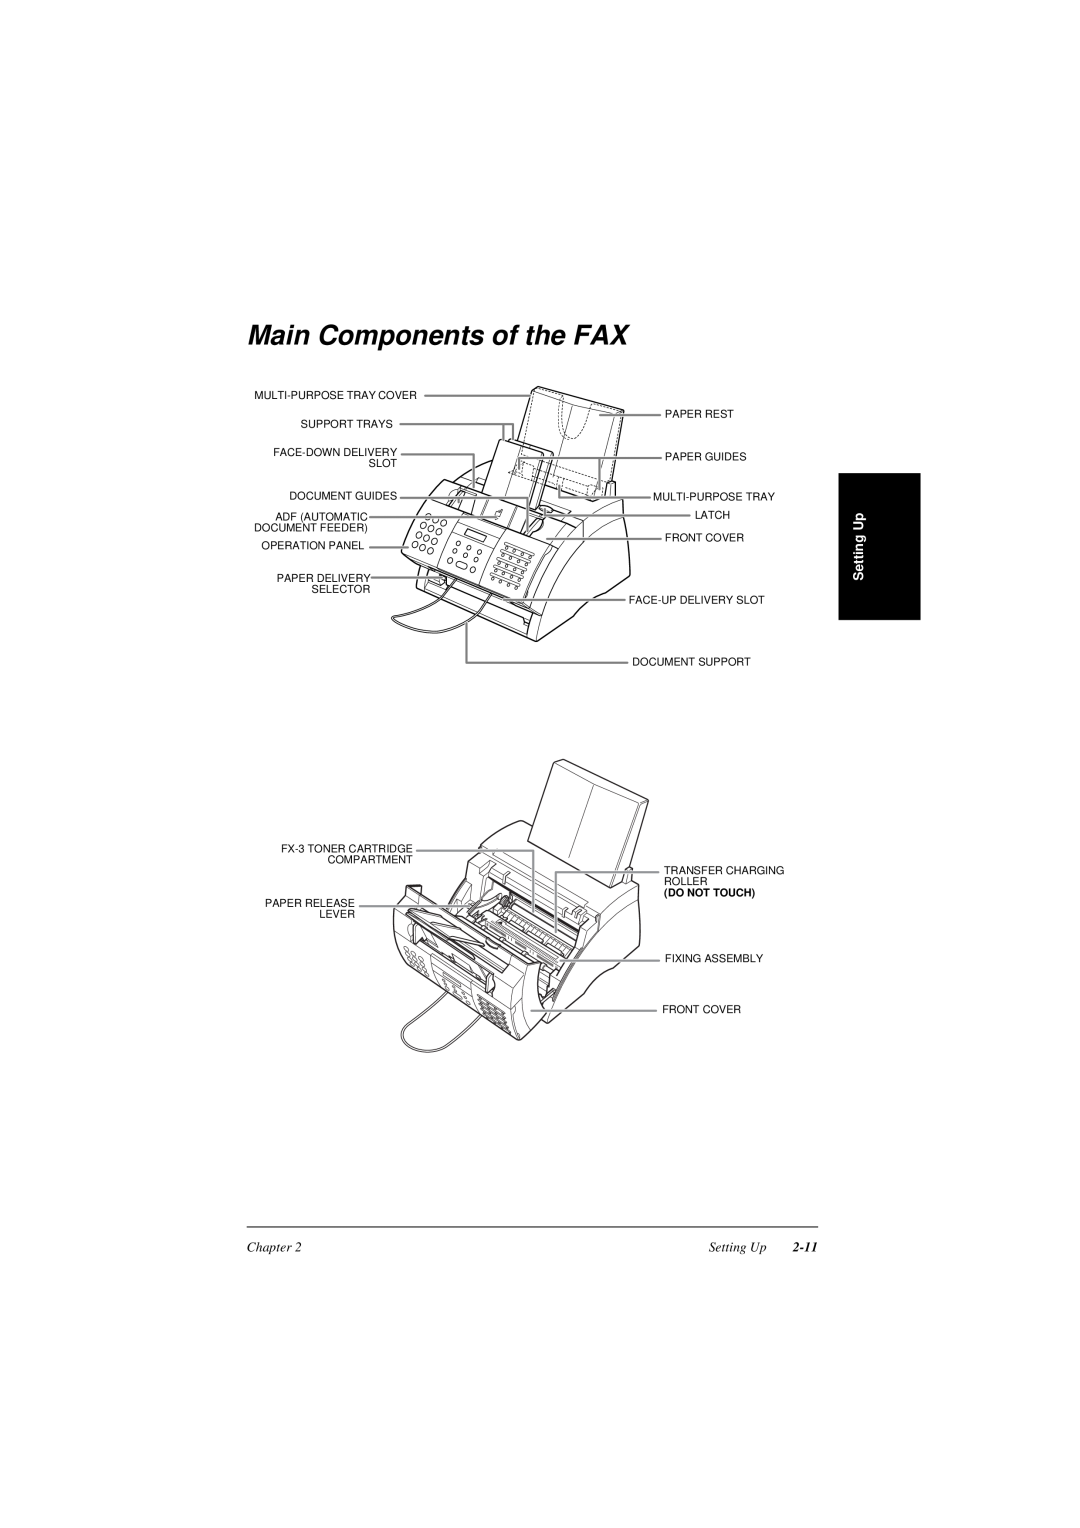 Canon L240, L290 manual Main Components of the FAX, Setting Up, Chapter, 2-11, Do Not Touch 